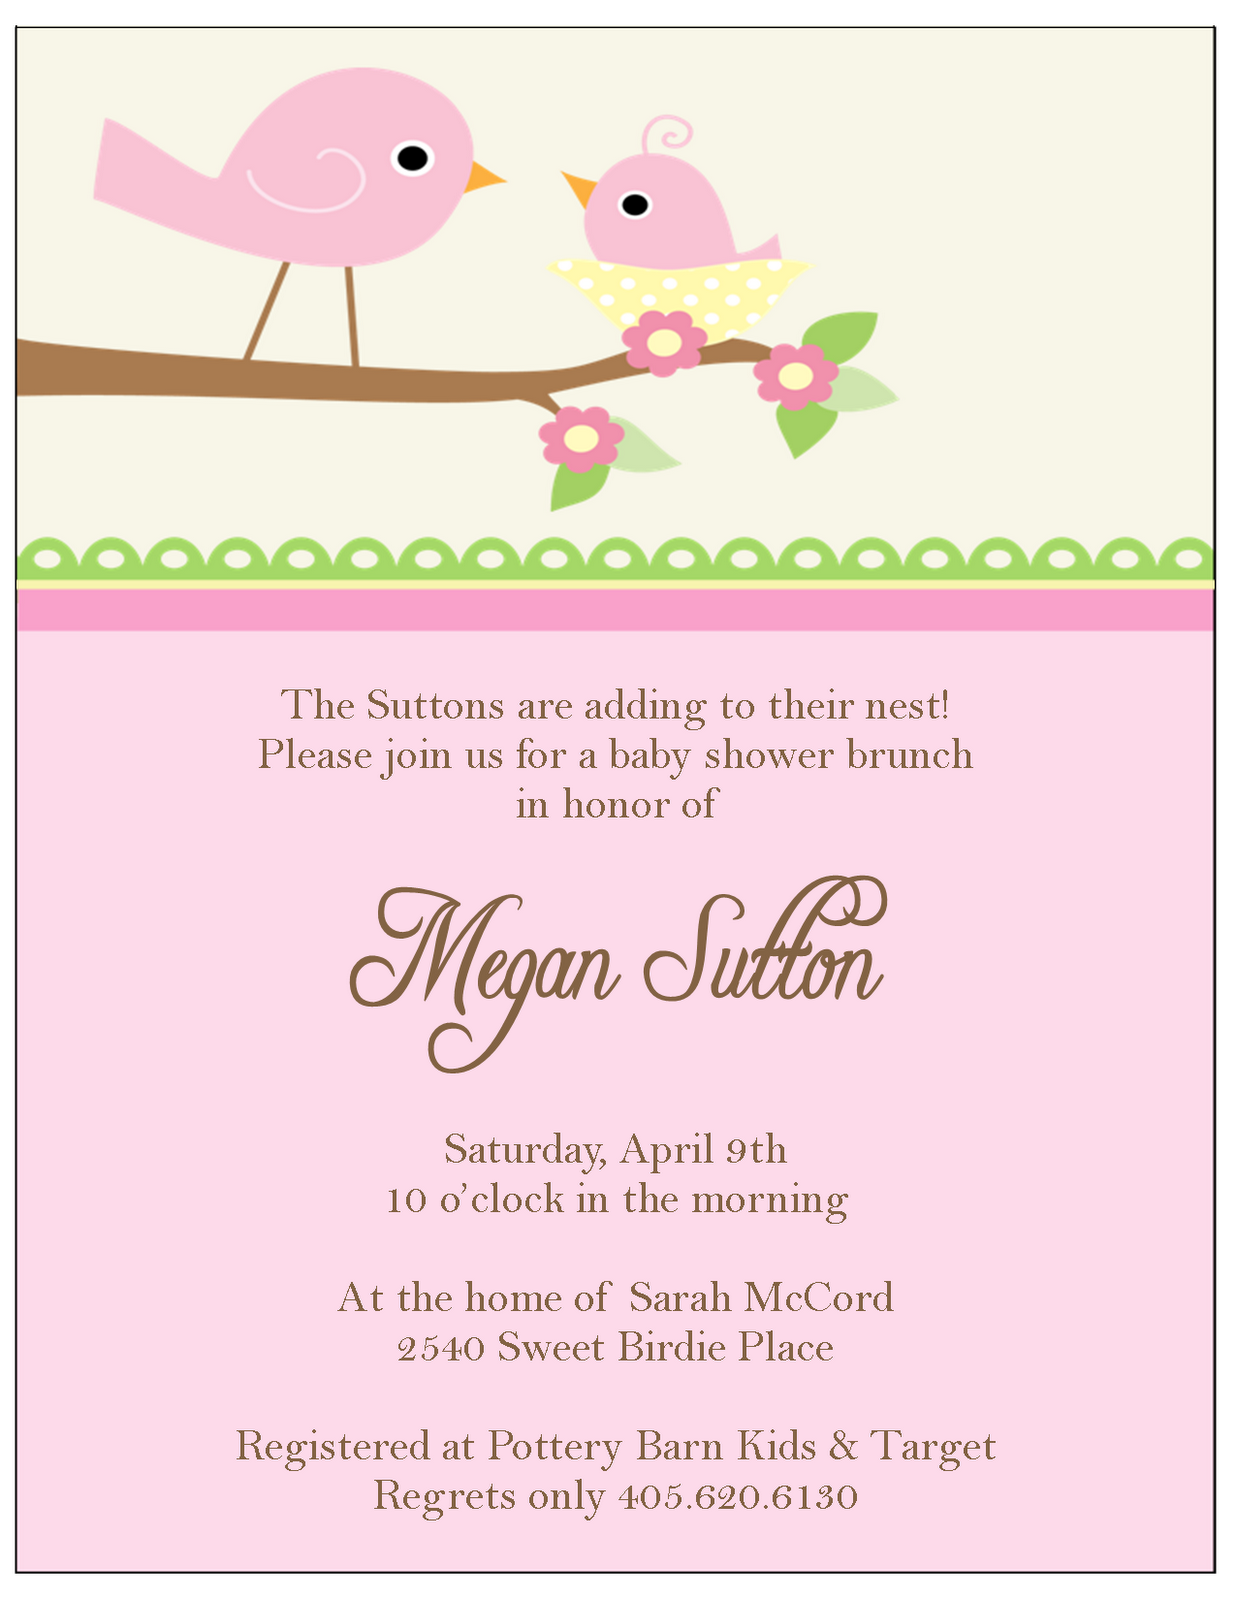 Full Size of Baby Shower:63+ Delightful Cheap Baby Shower Invitations Image Inspirations Cheap Baby Shower Invitations Baby Shower Accessories Baby Shower Host Save The Date Baby Shower Baby Shower Paper Full Size Of Colorsbaby Shower Invites For Stylish Baby Shower For Cake